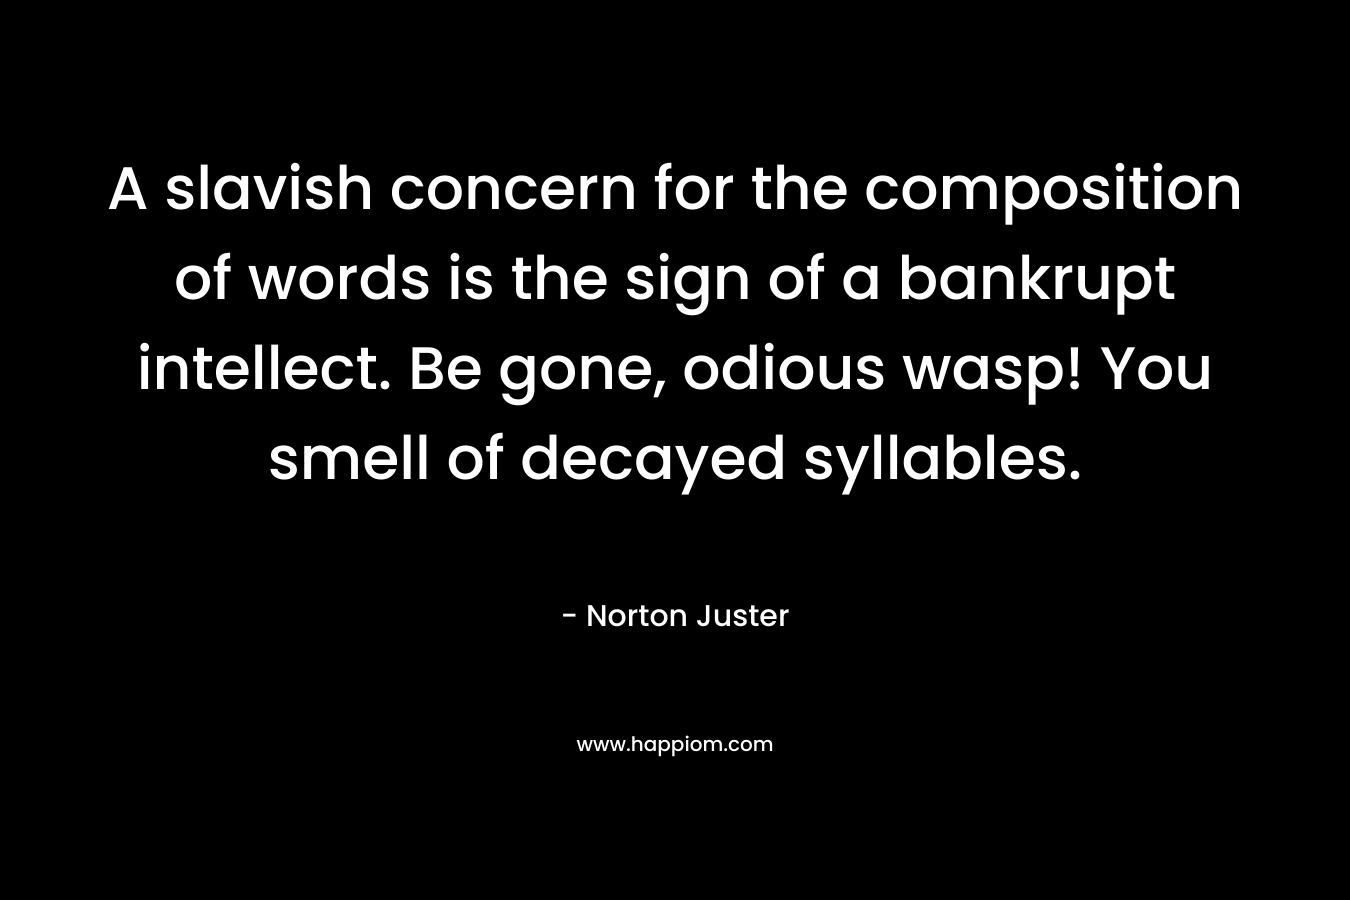 A slavish concern for the composition of words is the sign of a bankrupt intellect. Be gone, odious wasp! You smell of decayed syllables. – Norton Juster